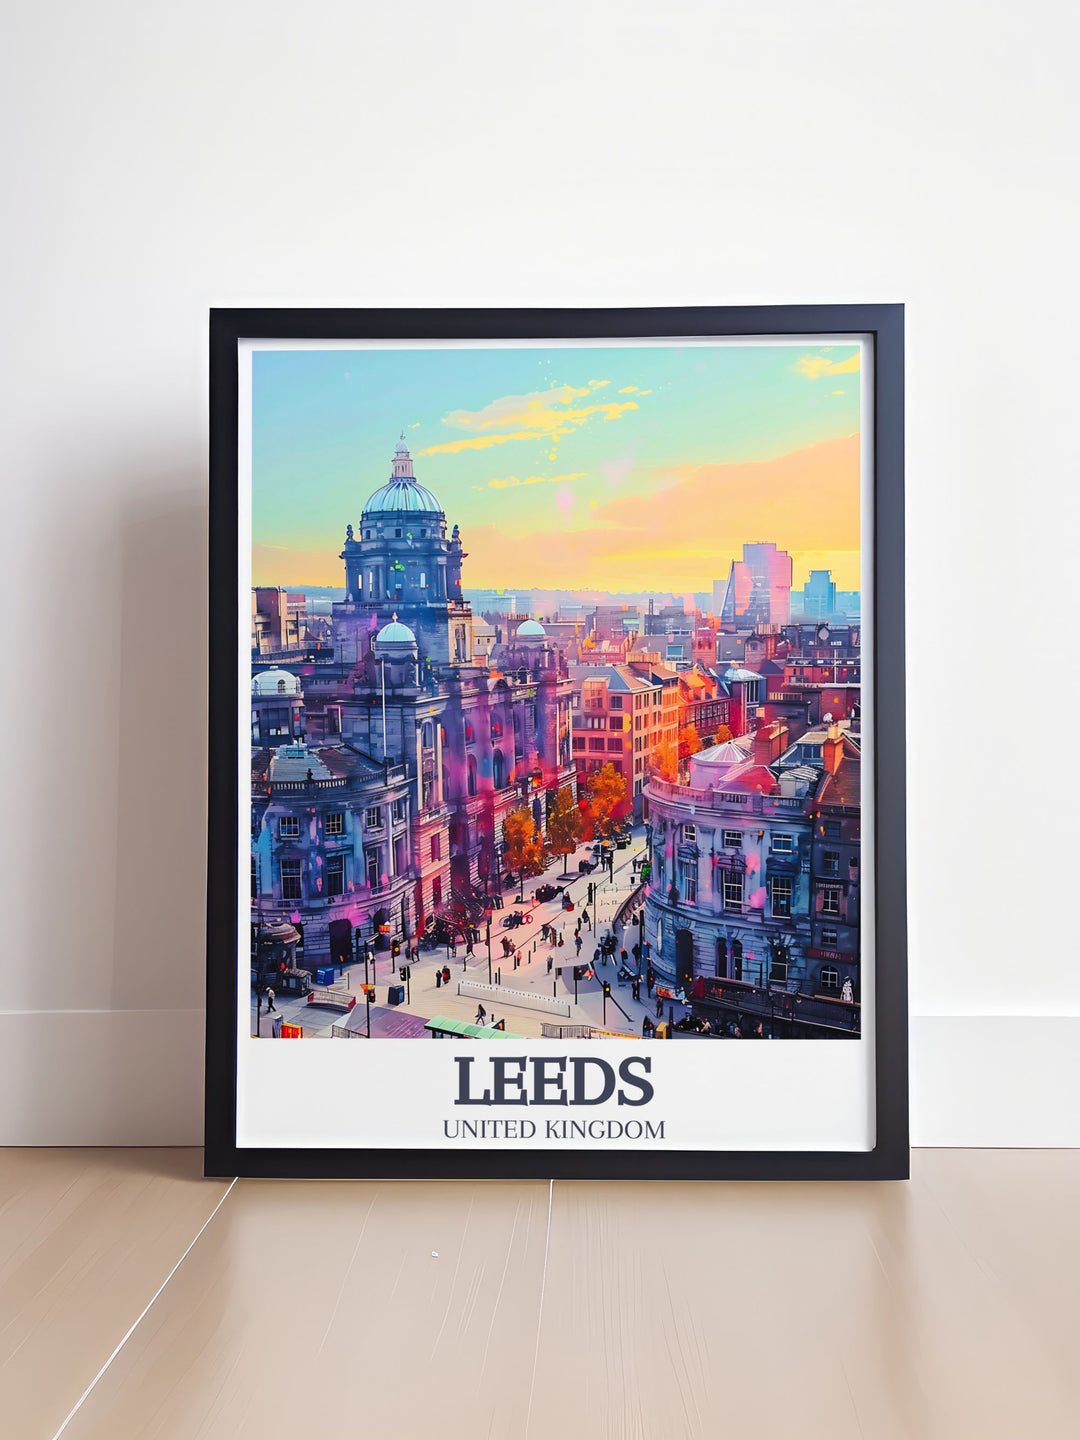 Unique Leeds Corn Exchange and Briggate High Street travel poster capturing the essence of Leeds vibrant city life. Perfect for England travel gift seekers and those looking to add Leeds Corn Exchange home decor to their collection.